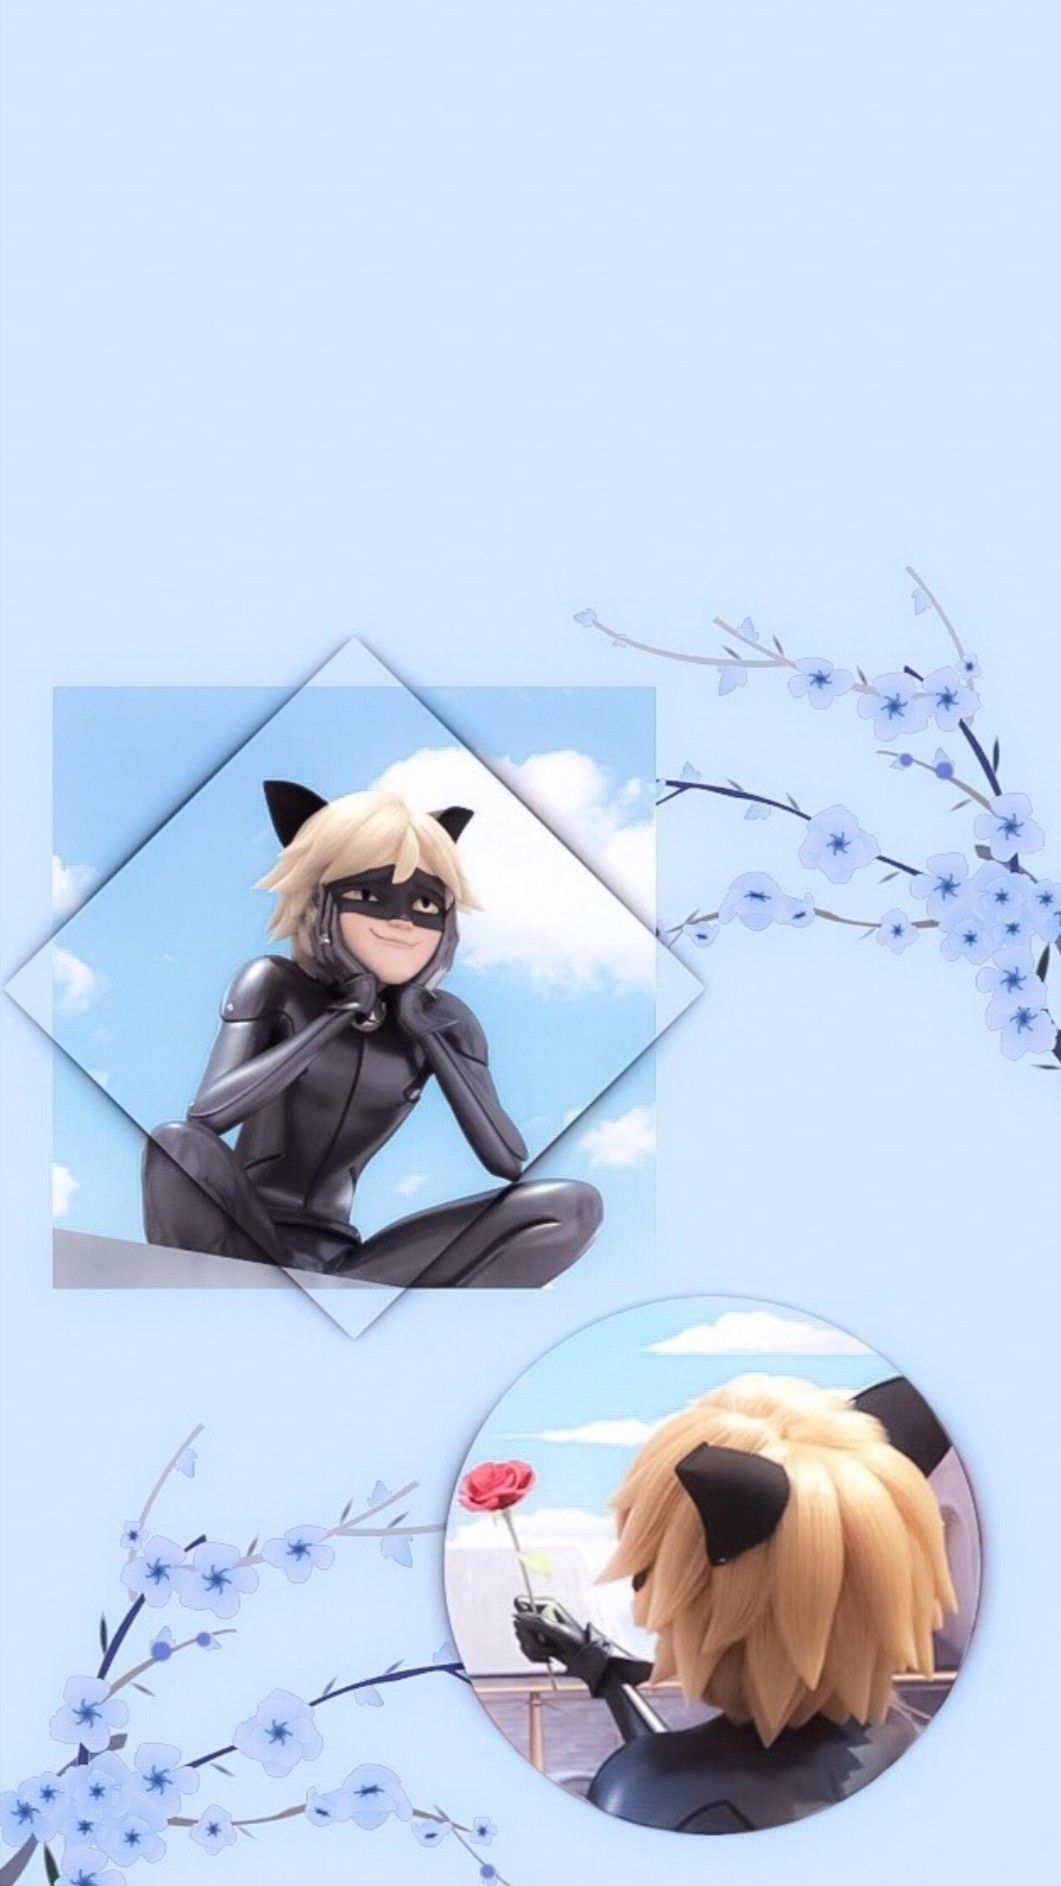 Miraculous ladybug funny image by Frisky on A+ Sonic. Miraculous